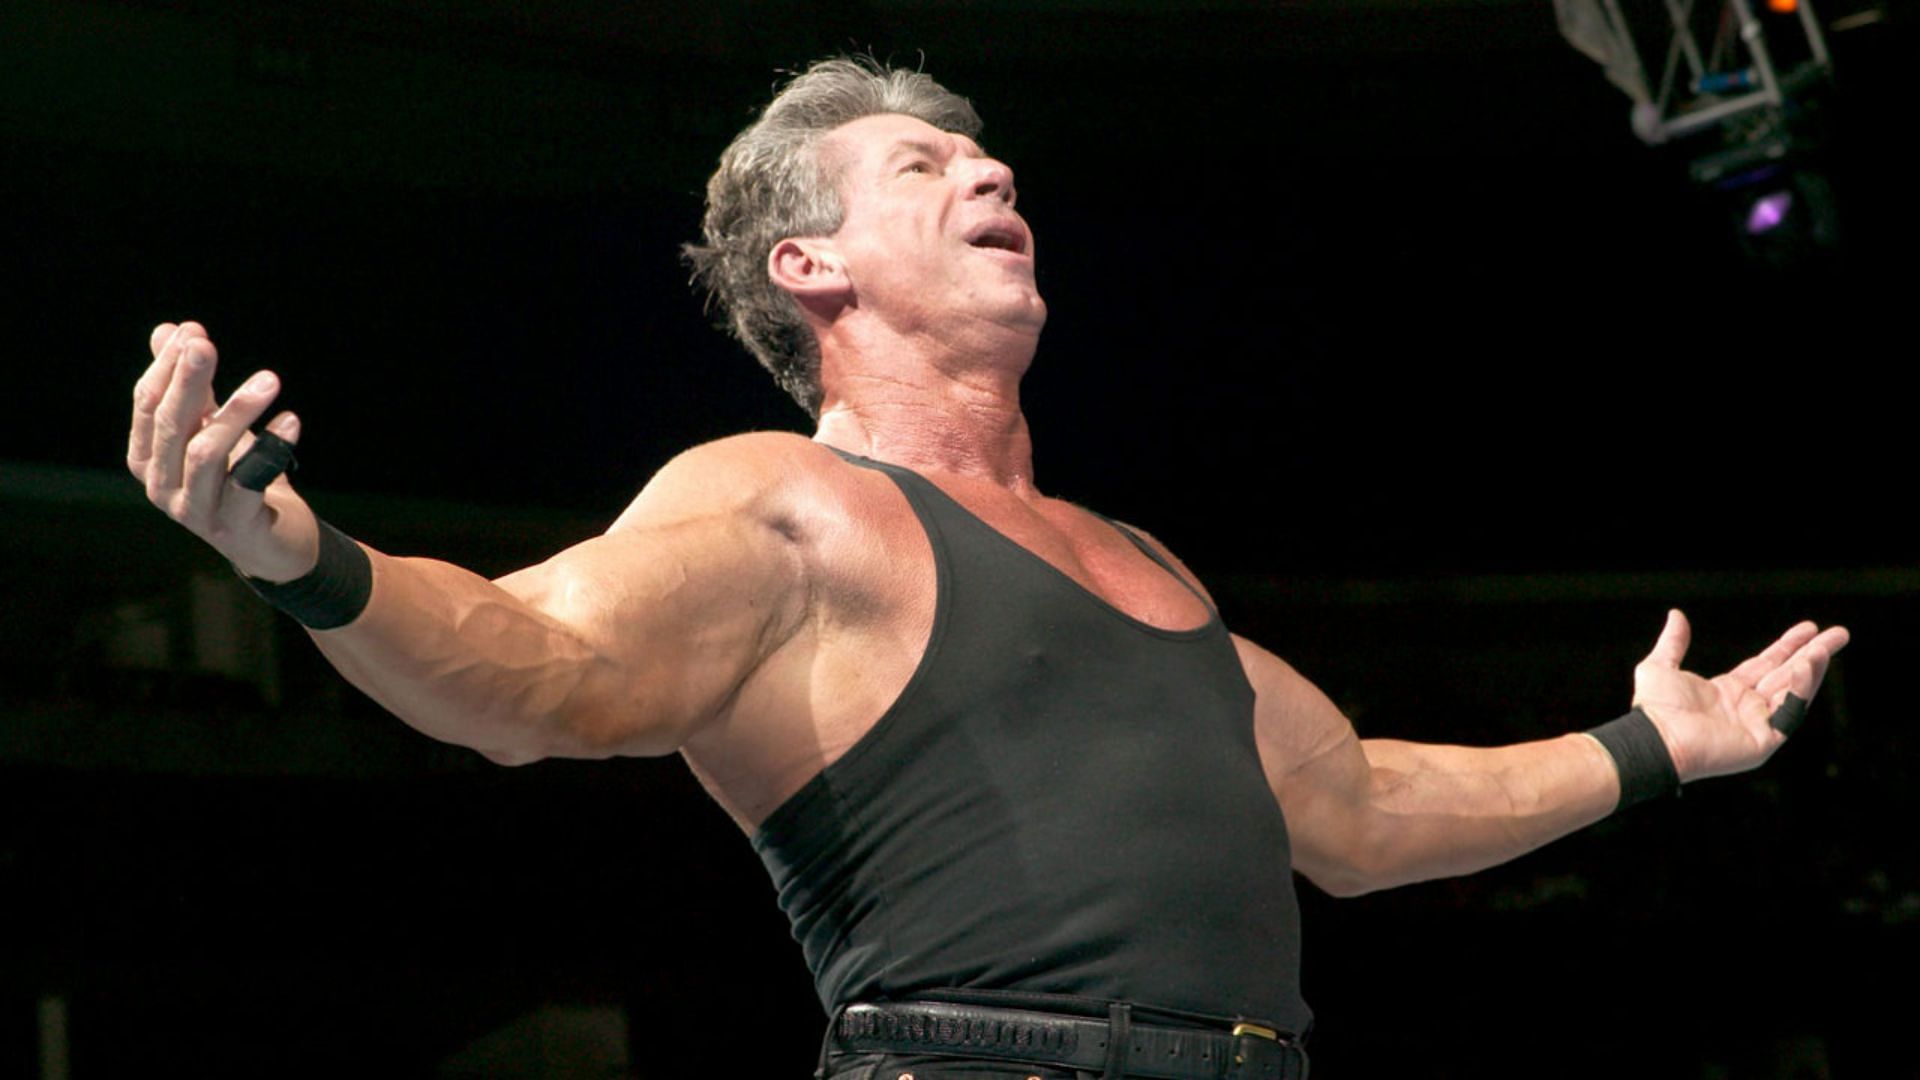 Vince McMahon may soon be wresting again.